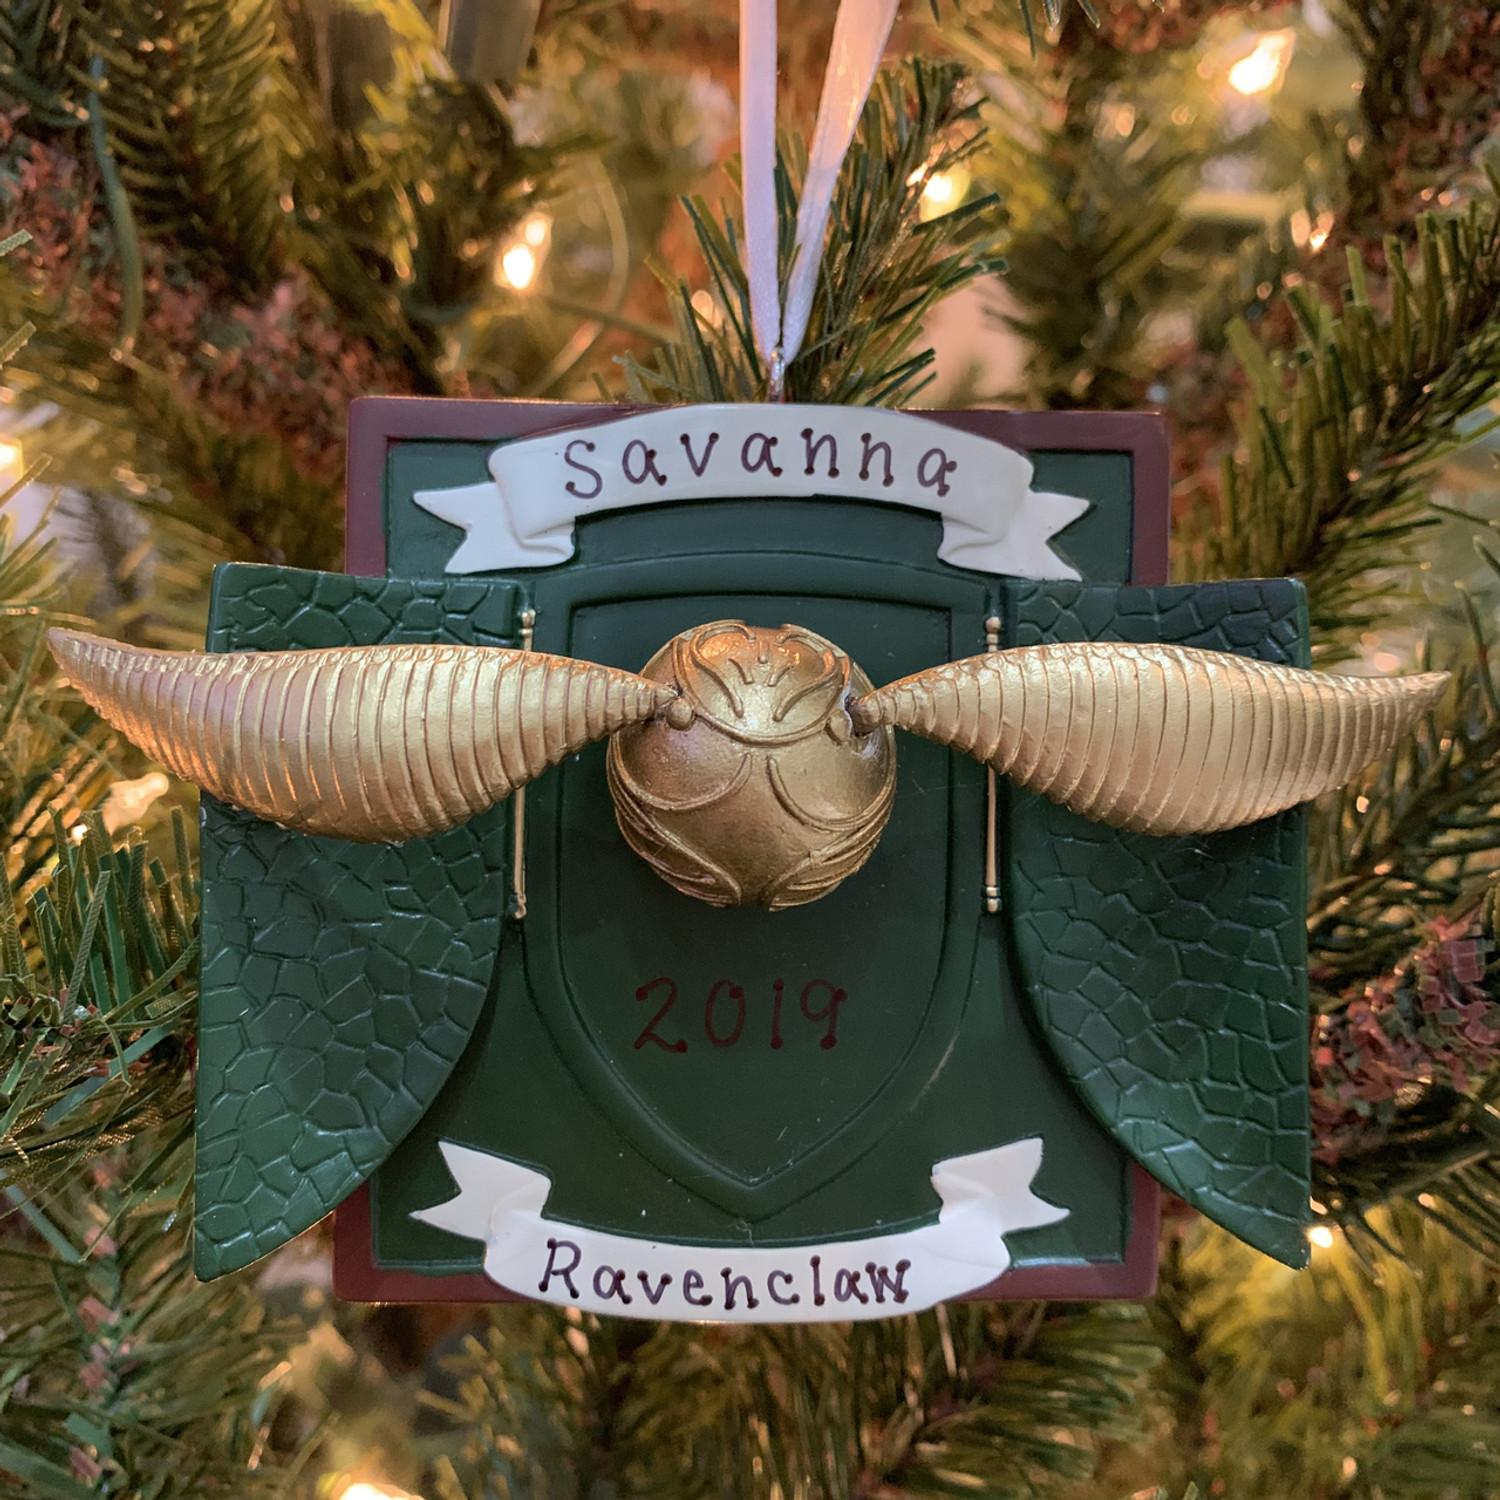 Hallmark 3 Harry Potter Golden Snitch Personalized Christmas Ornament 3HCM1000 by The Jolly Christmas Shop